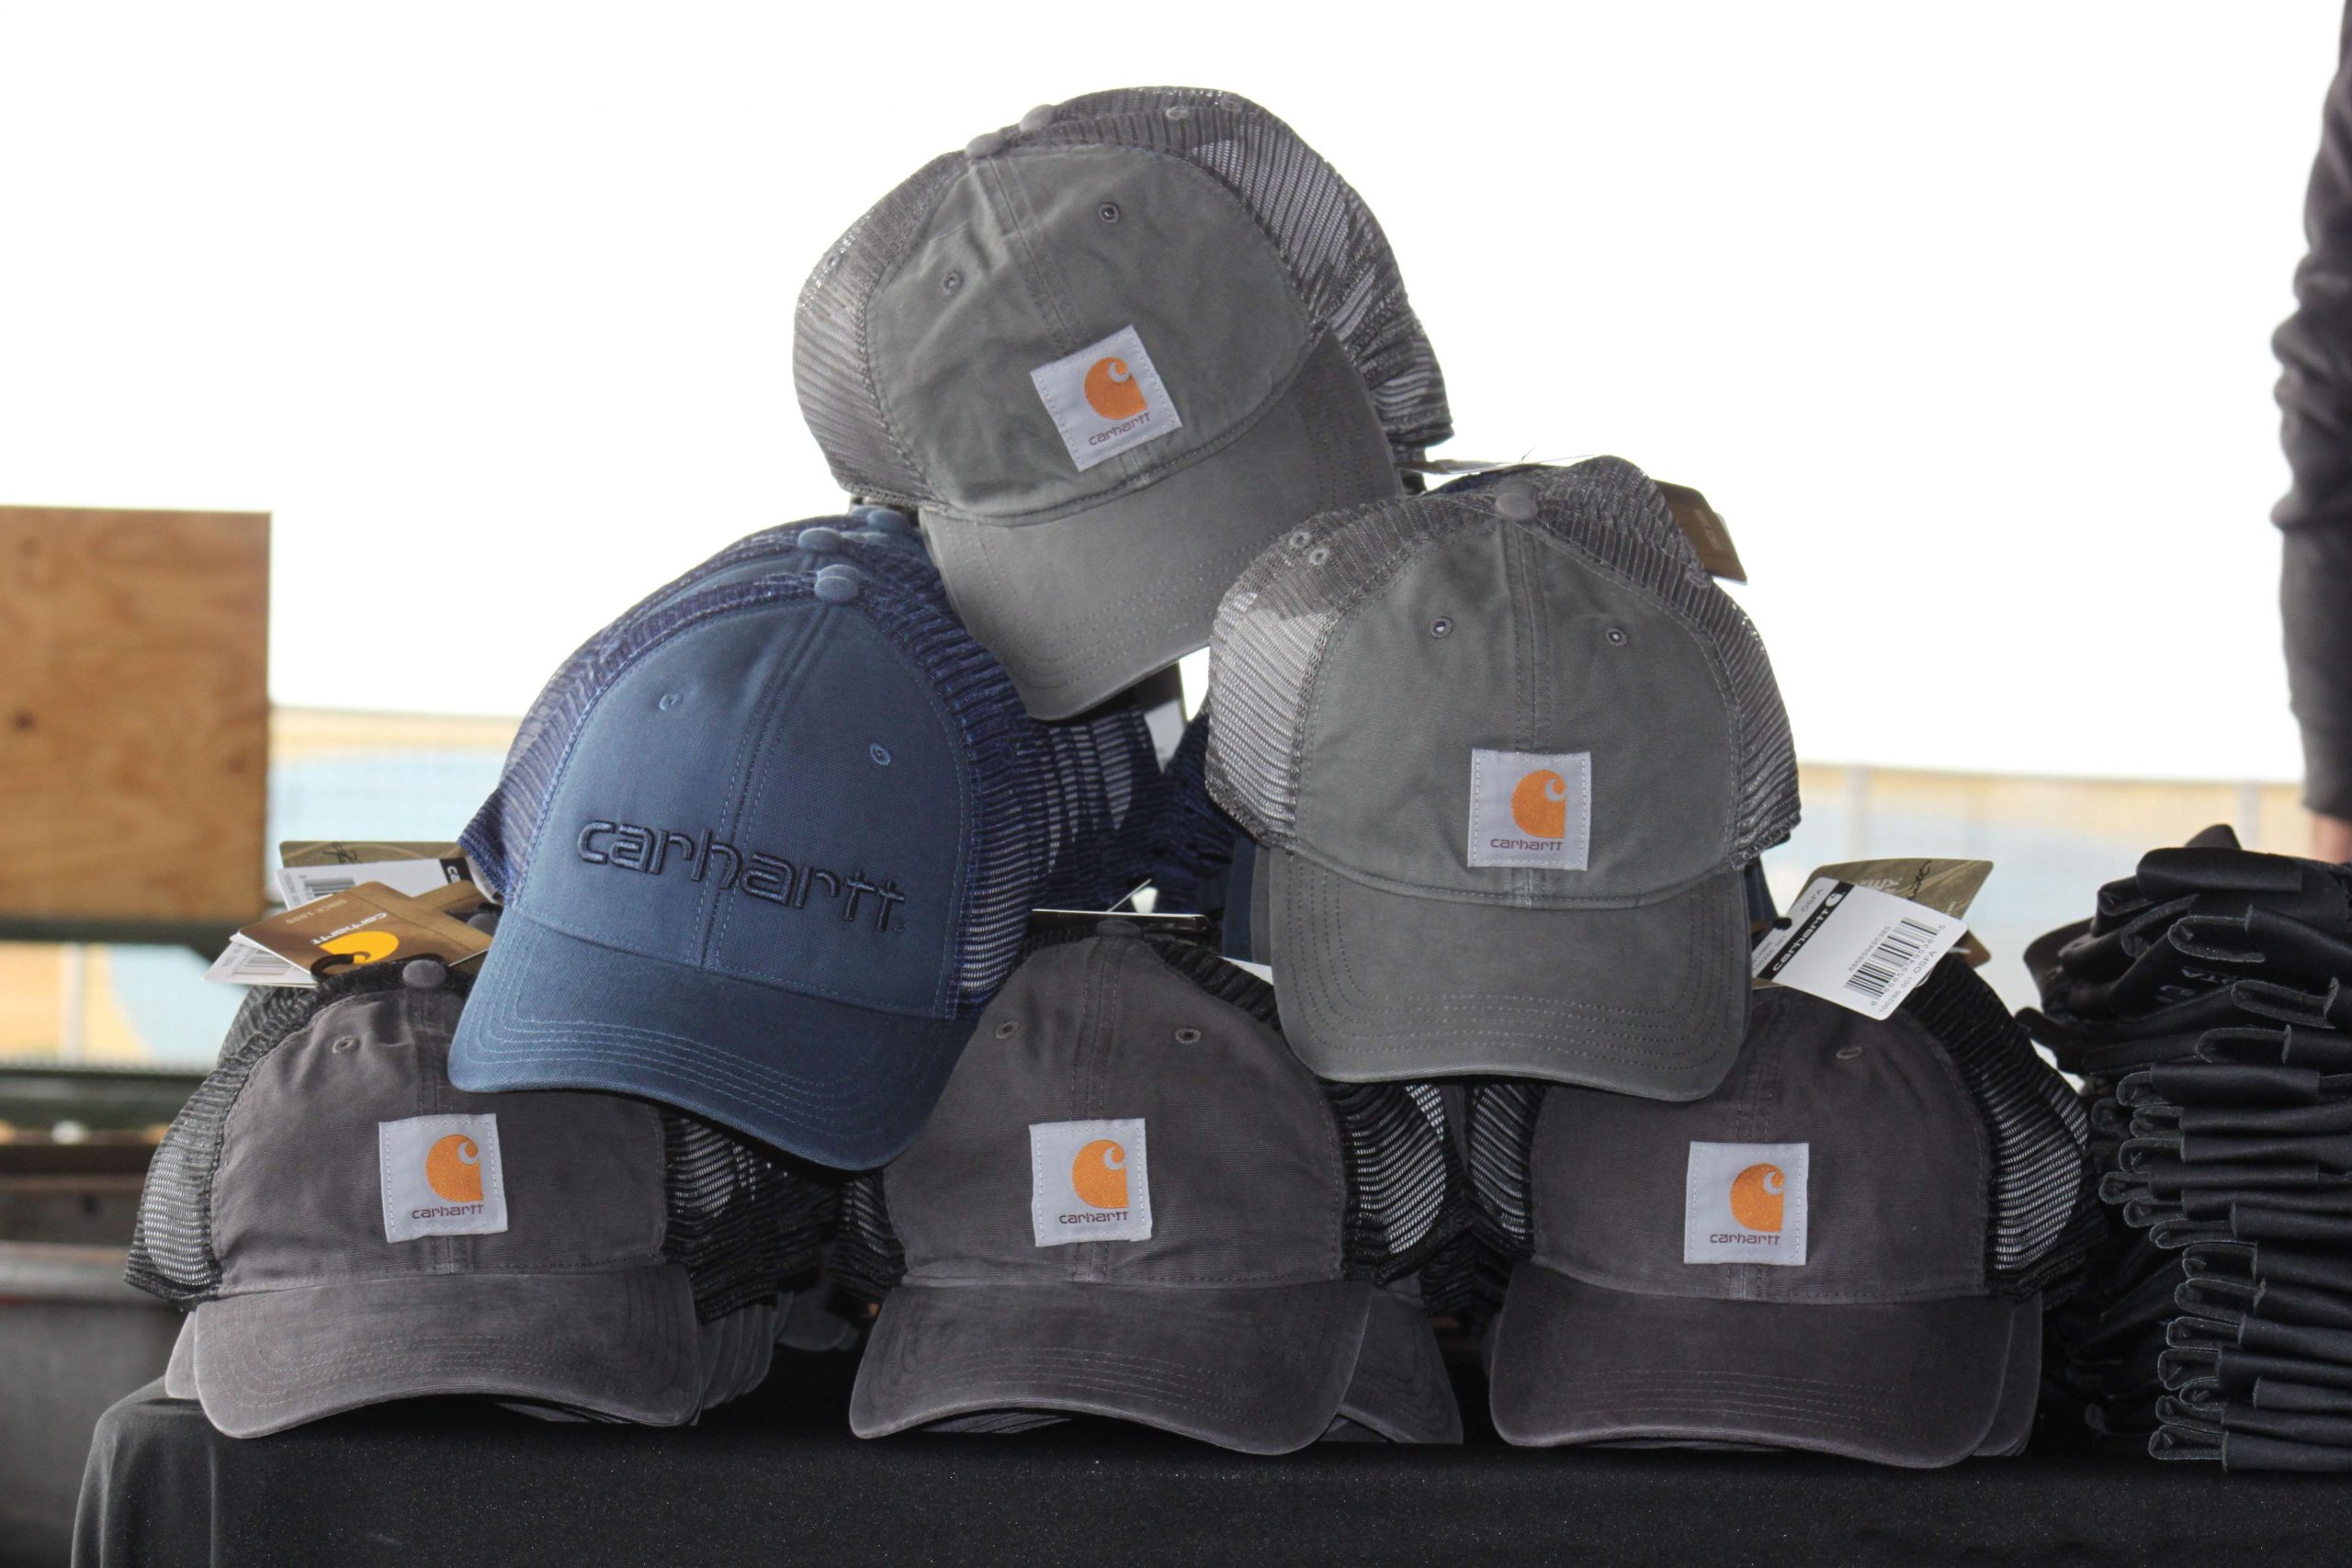 When the anglers do arrive, there is all kinds of swag for them to grab. Like these Carhartt hats.